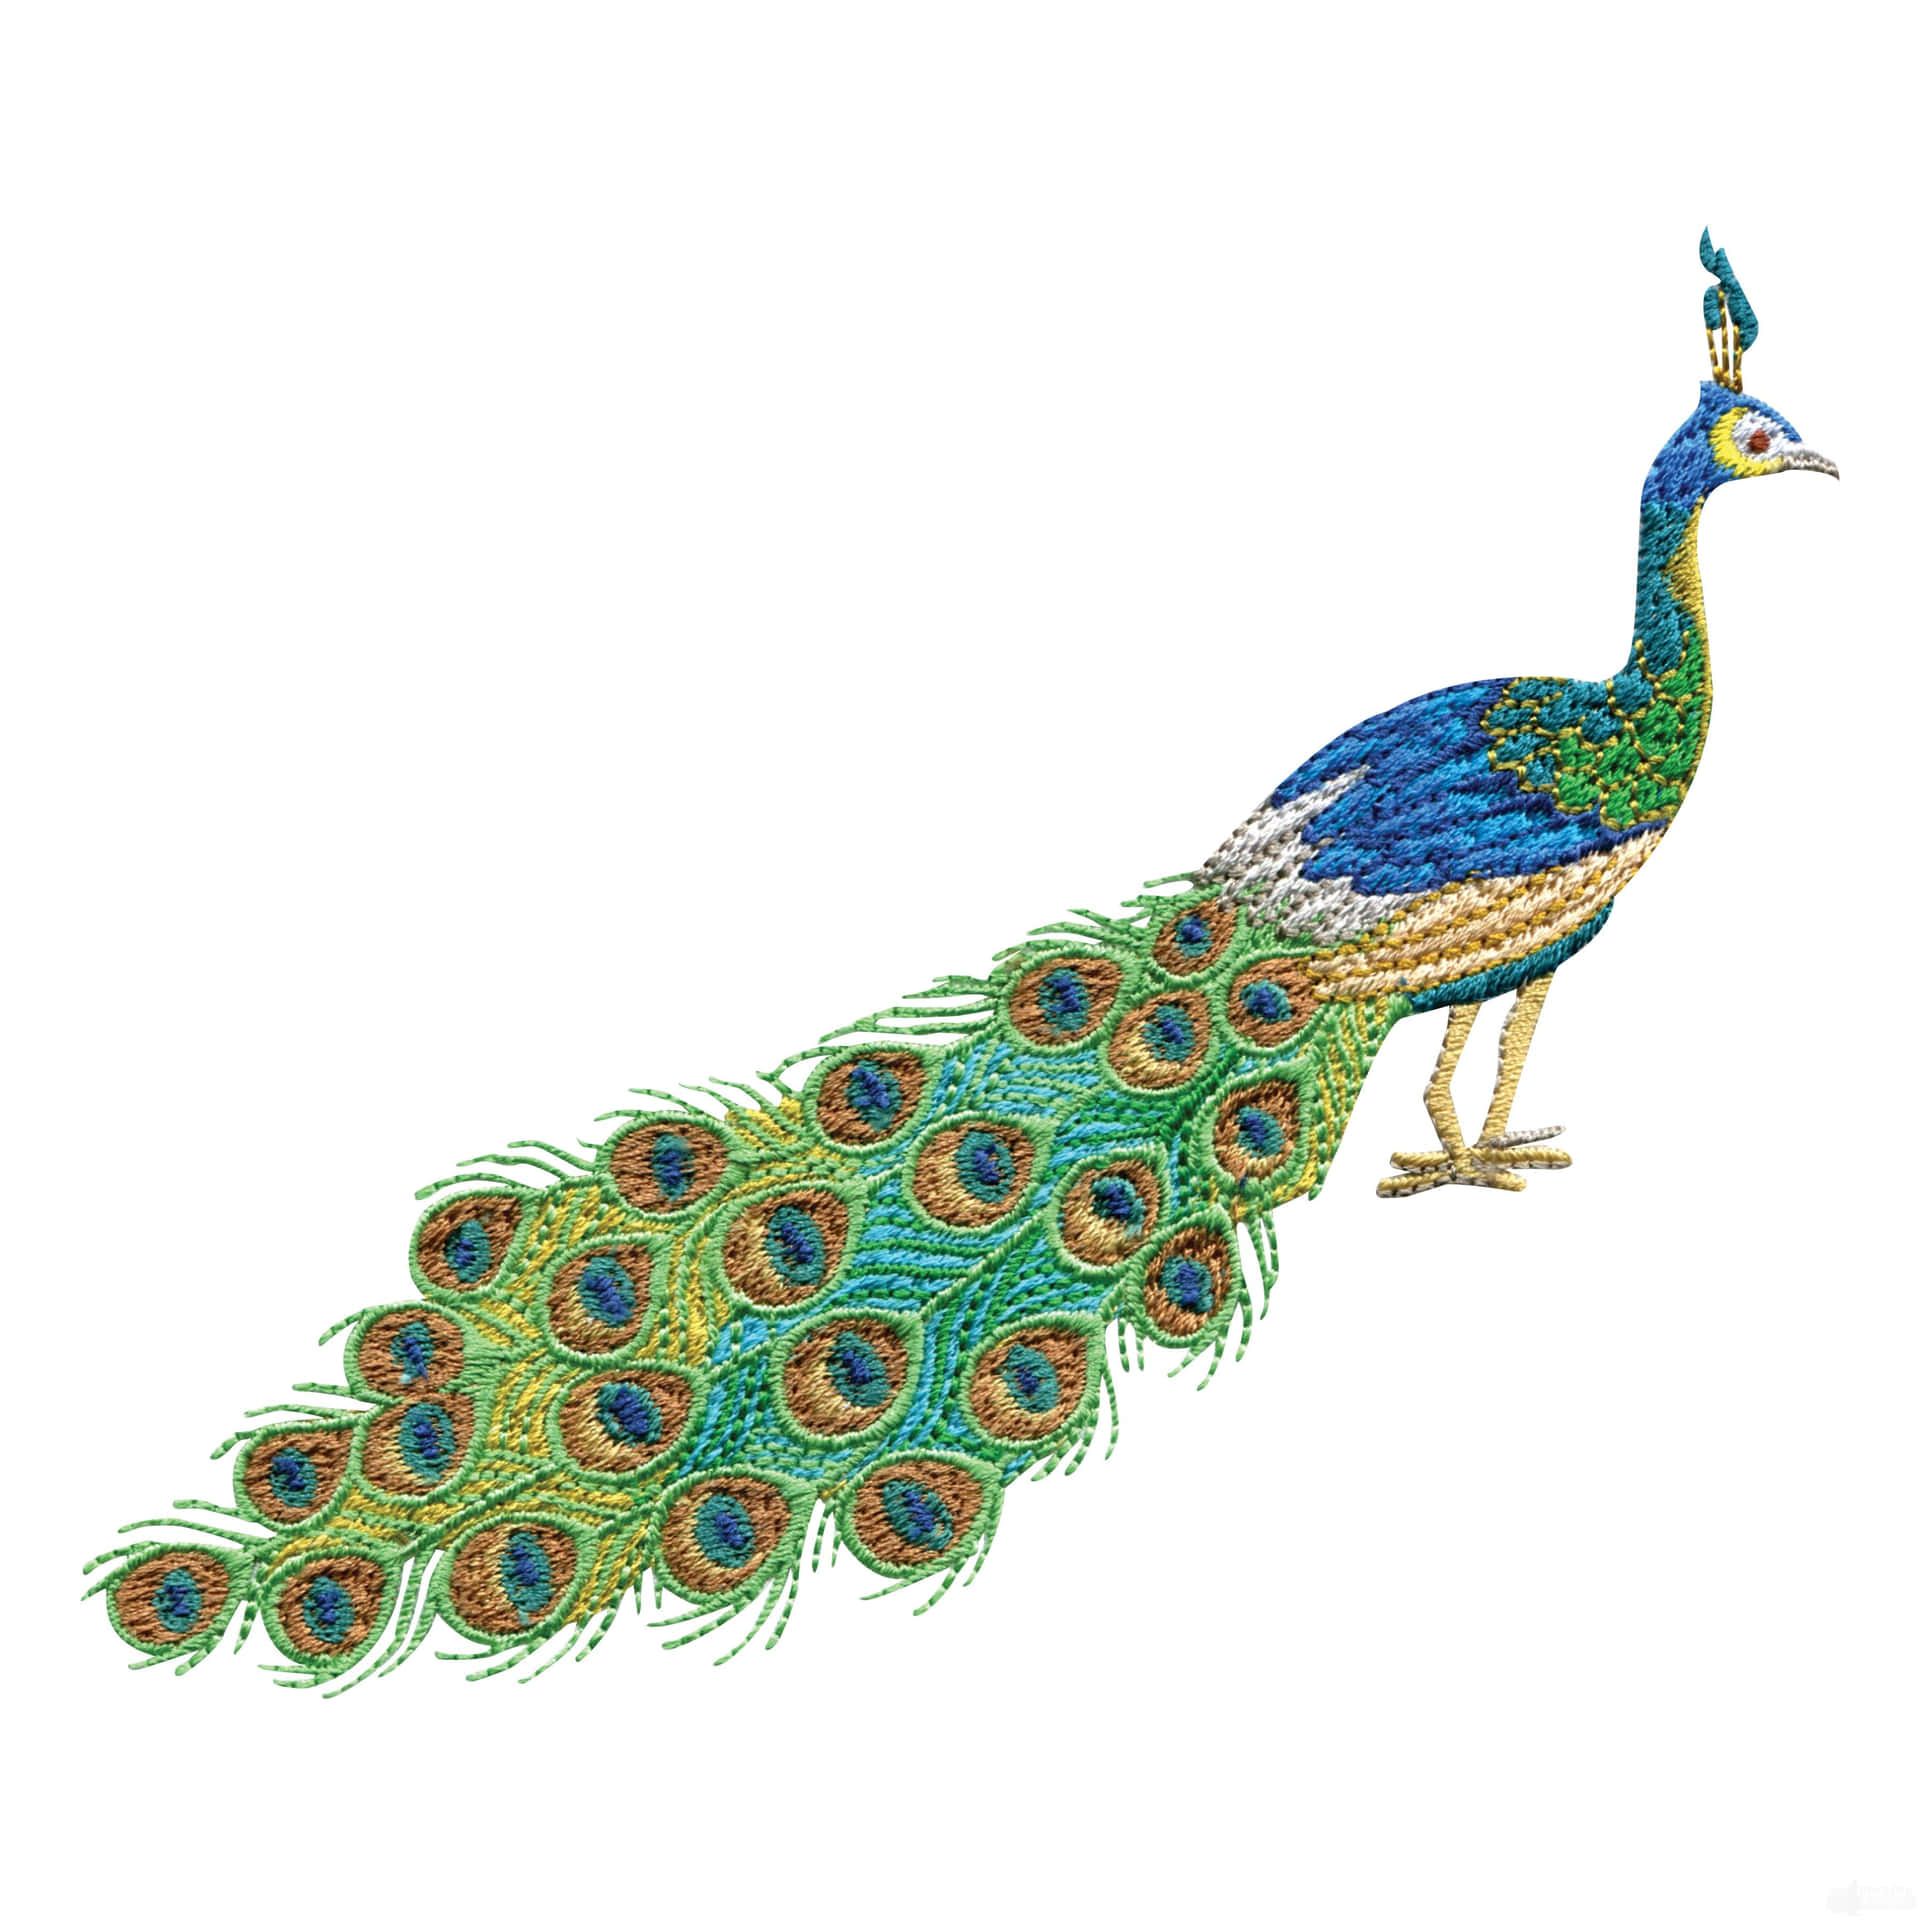 Image  Textured Peacock Feathers